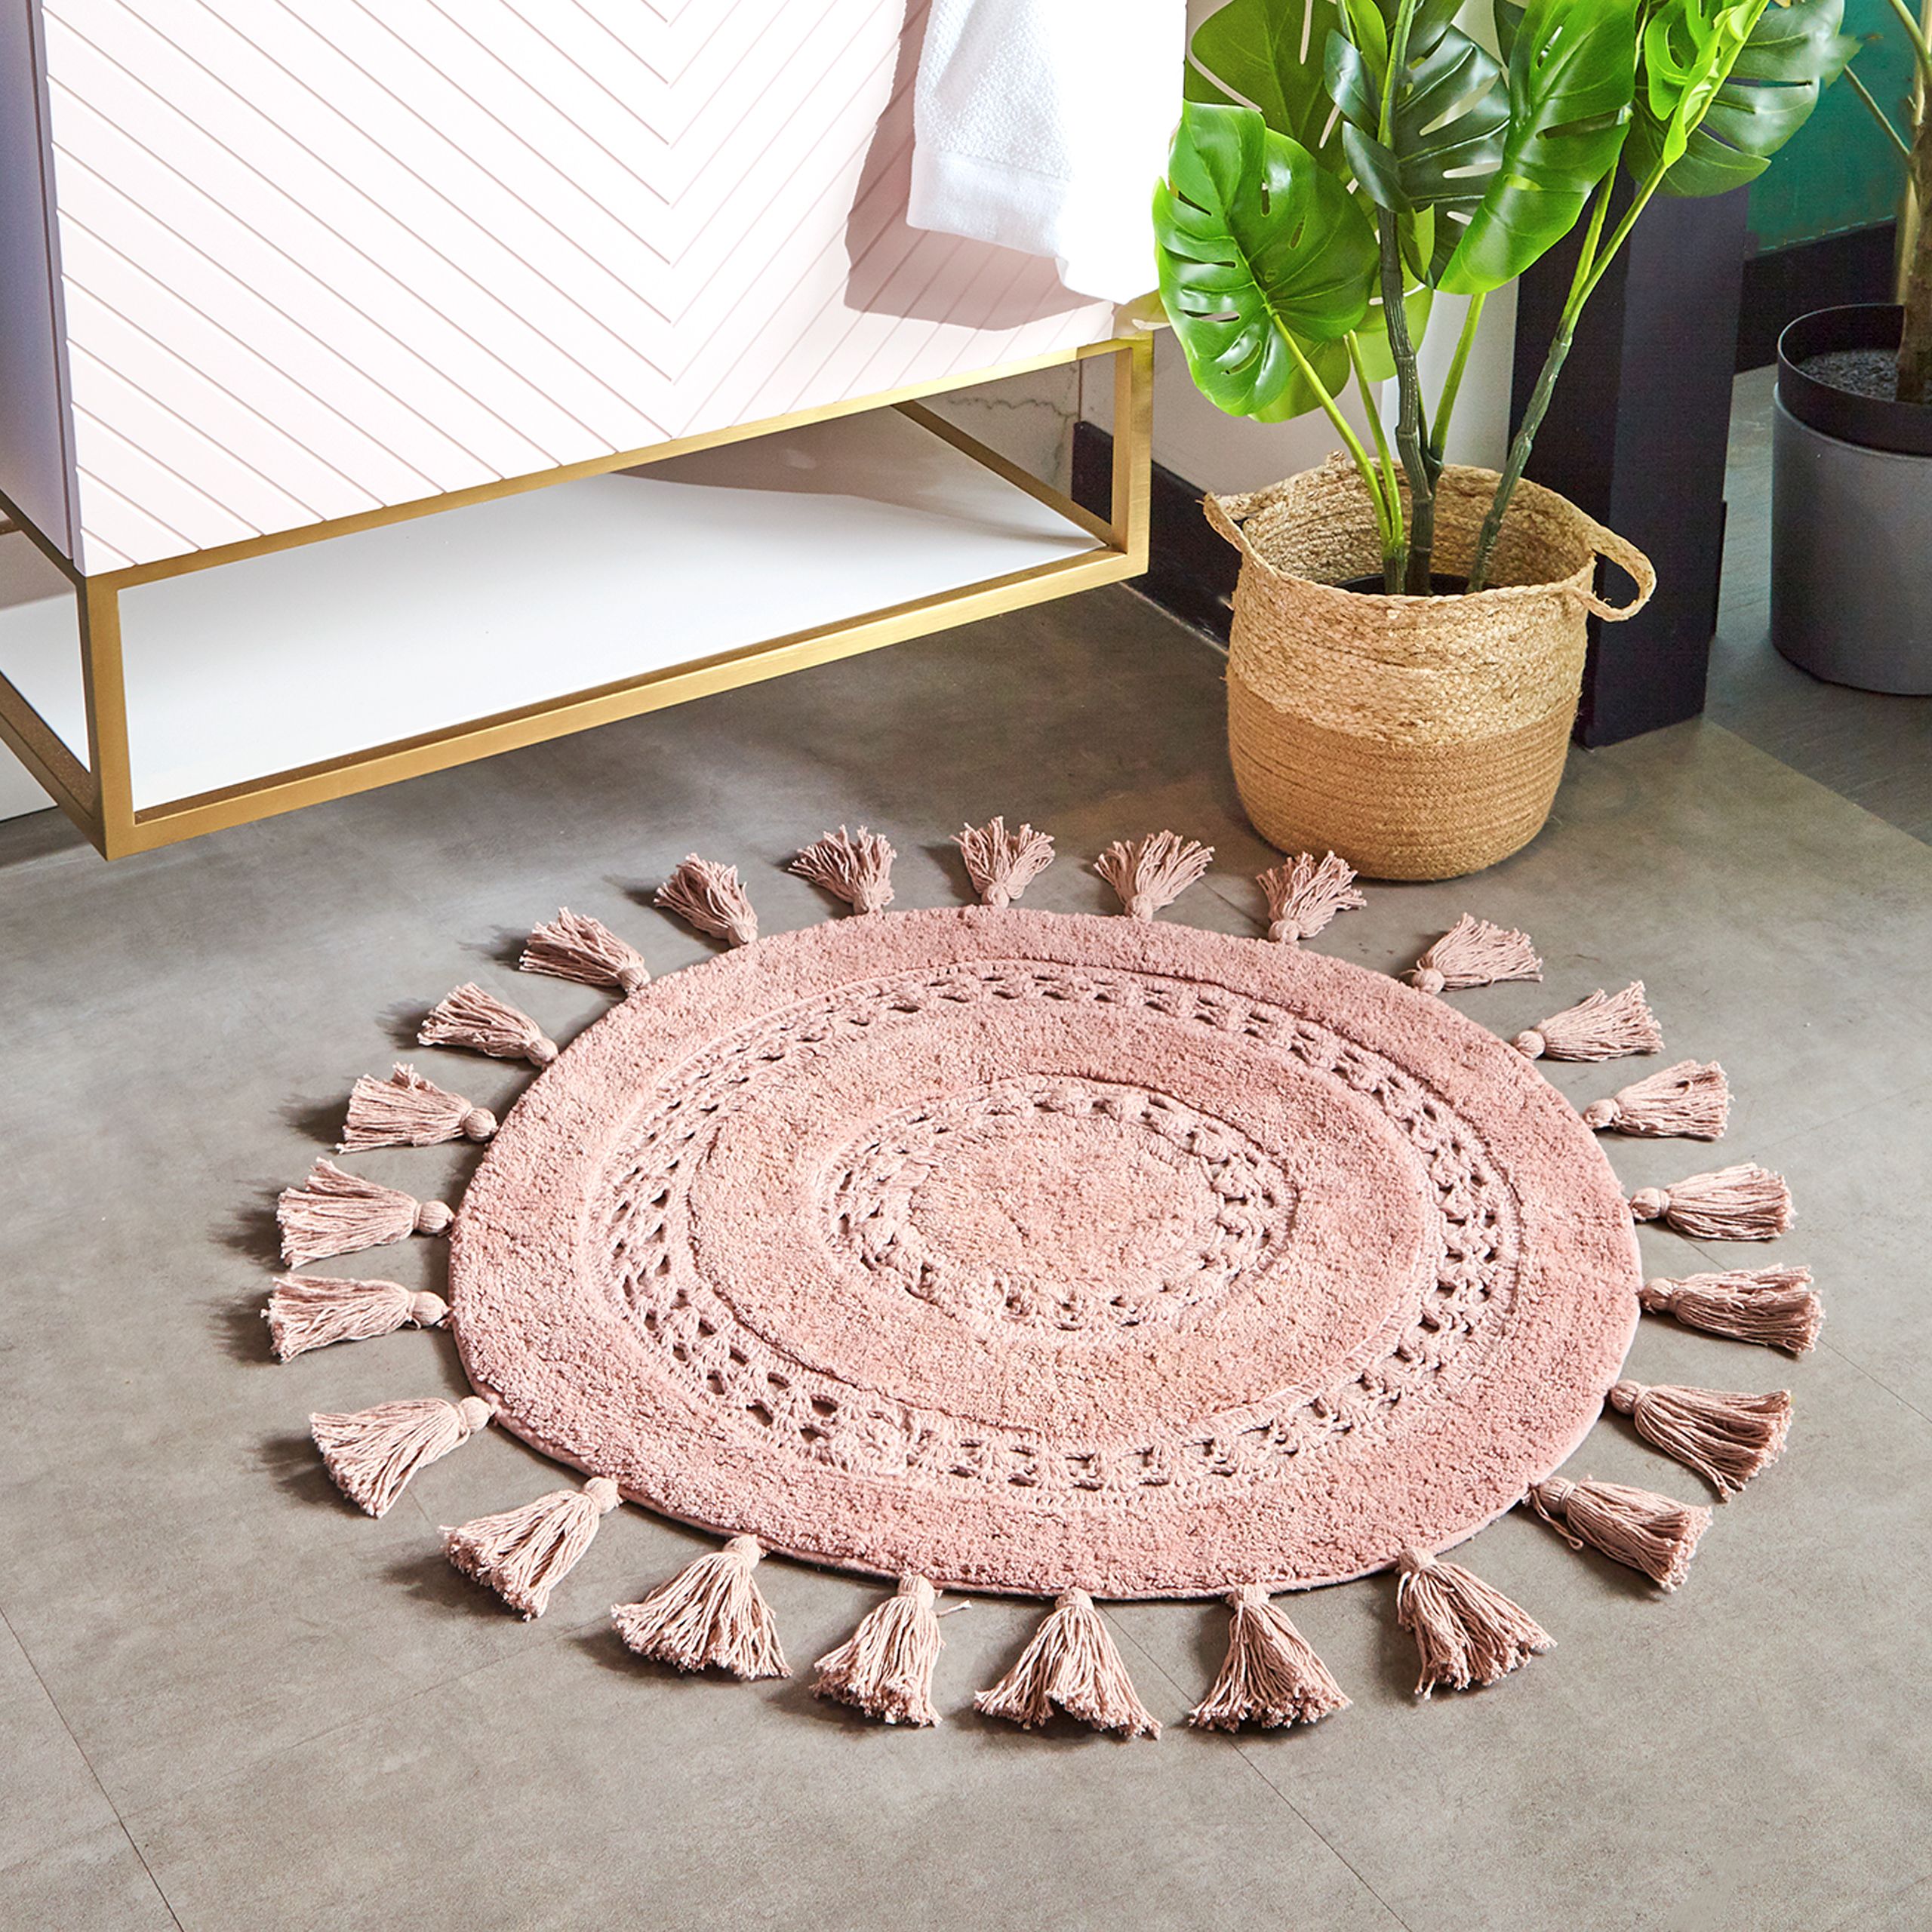 Featuring an intricate mandala woven design, complete with a chunky tasselled trim. Made from 100% Cotton, making this bath mat incredibly soft under foot. This bath mat has an anti-slip quality, keeping it securely in place on your bathroom floor. The 1950 GSM ensures this bath mat is super absorbent preventing post-bath or shower puddles.